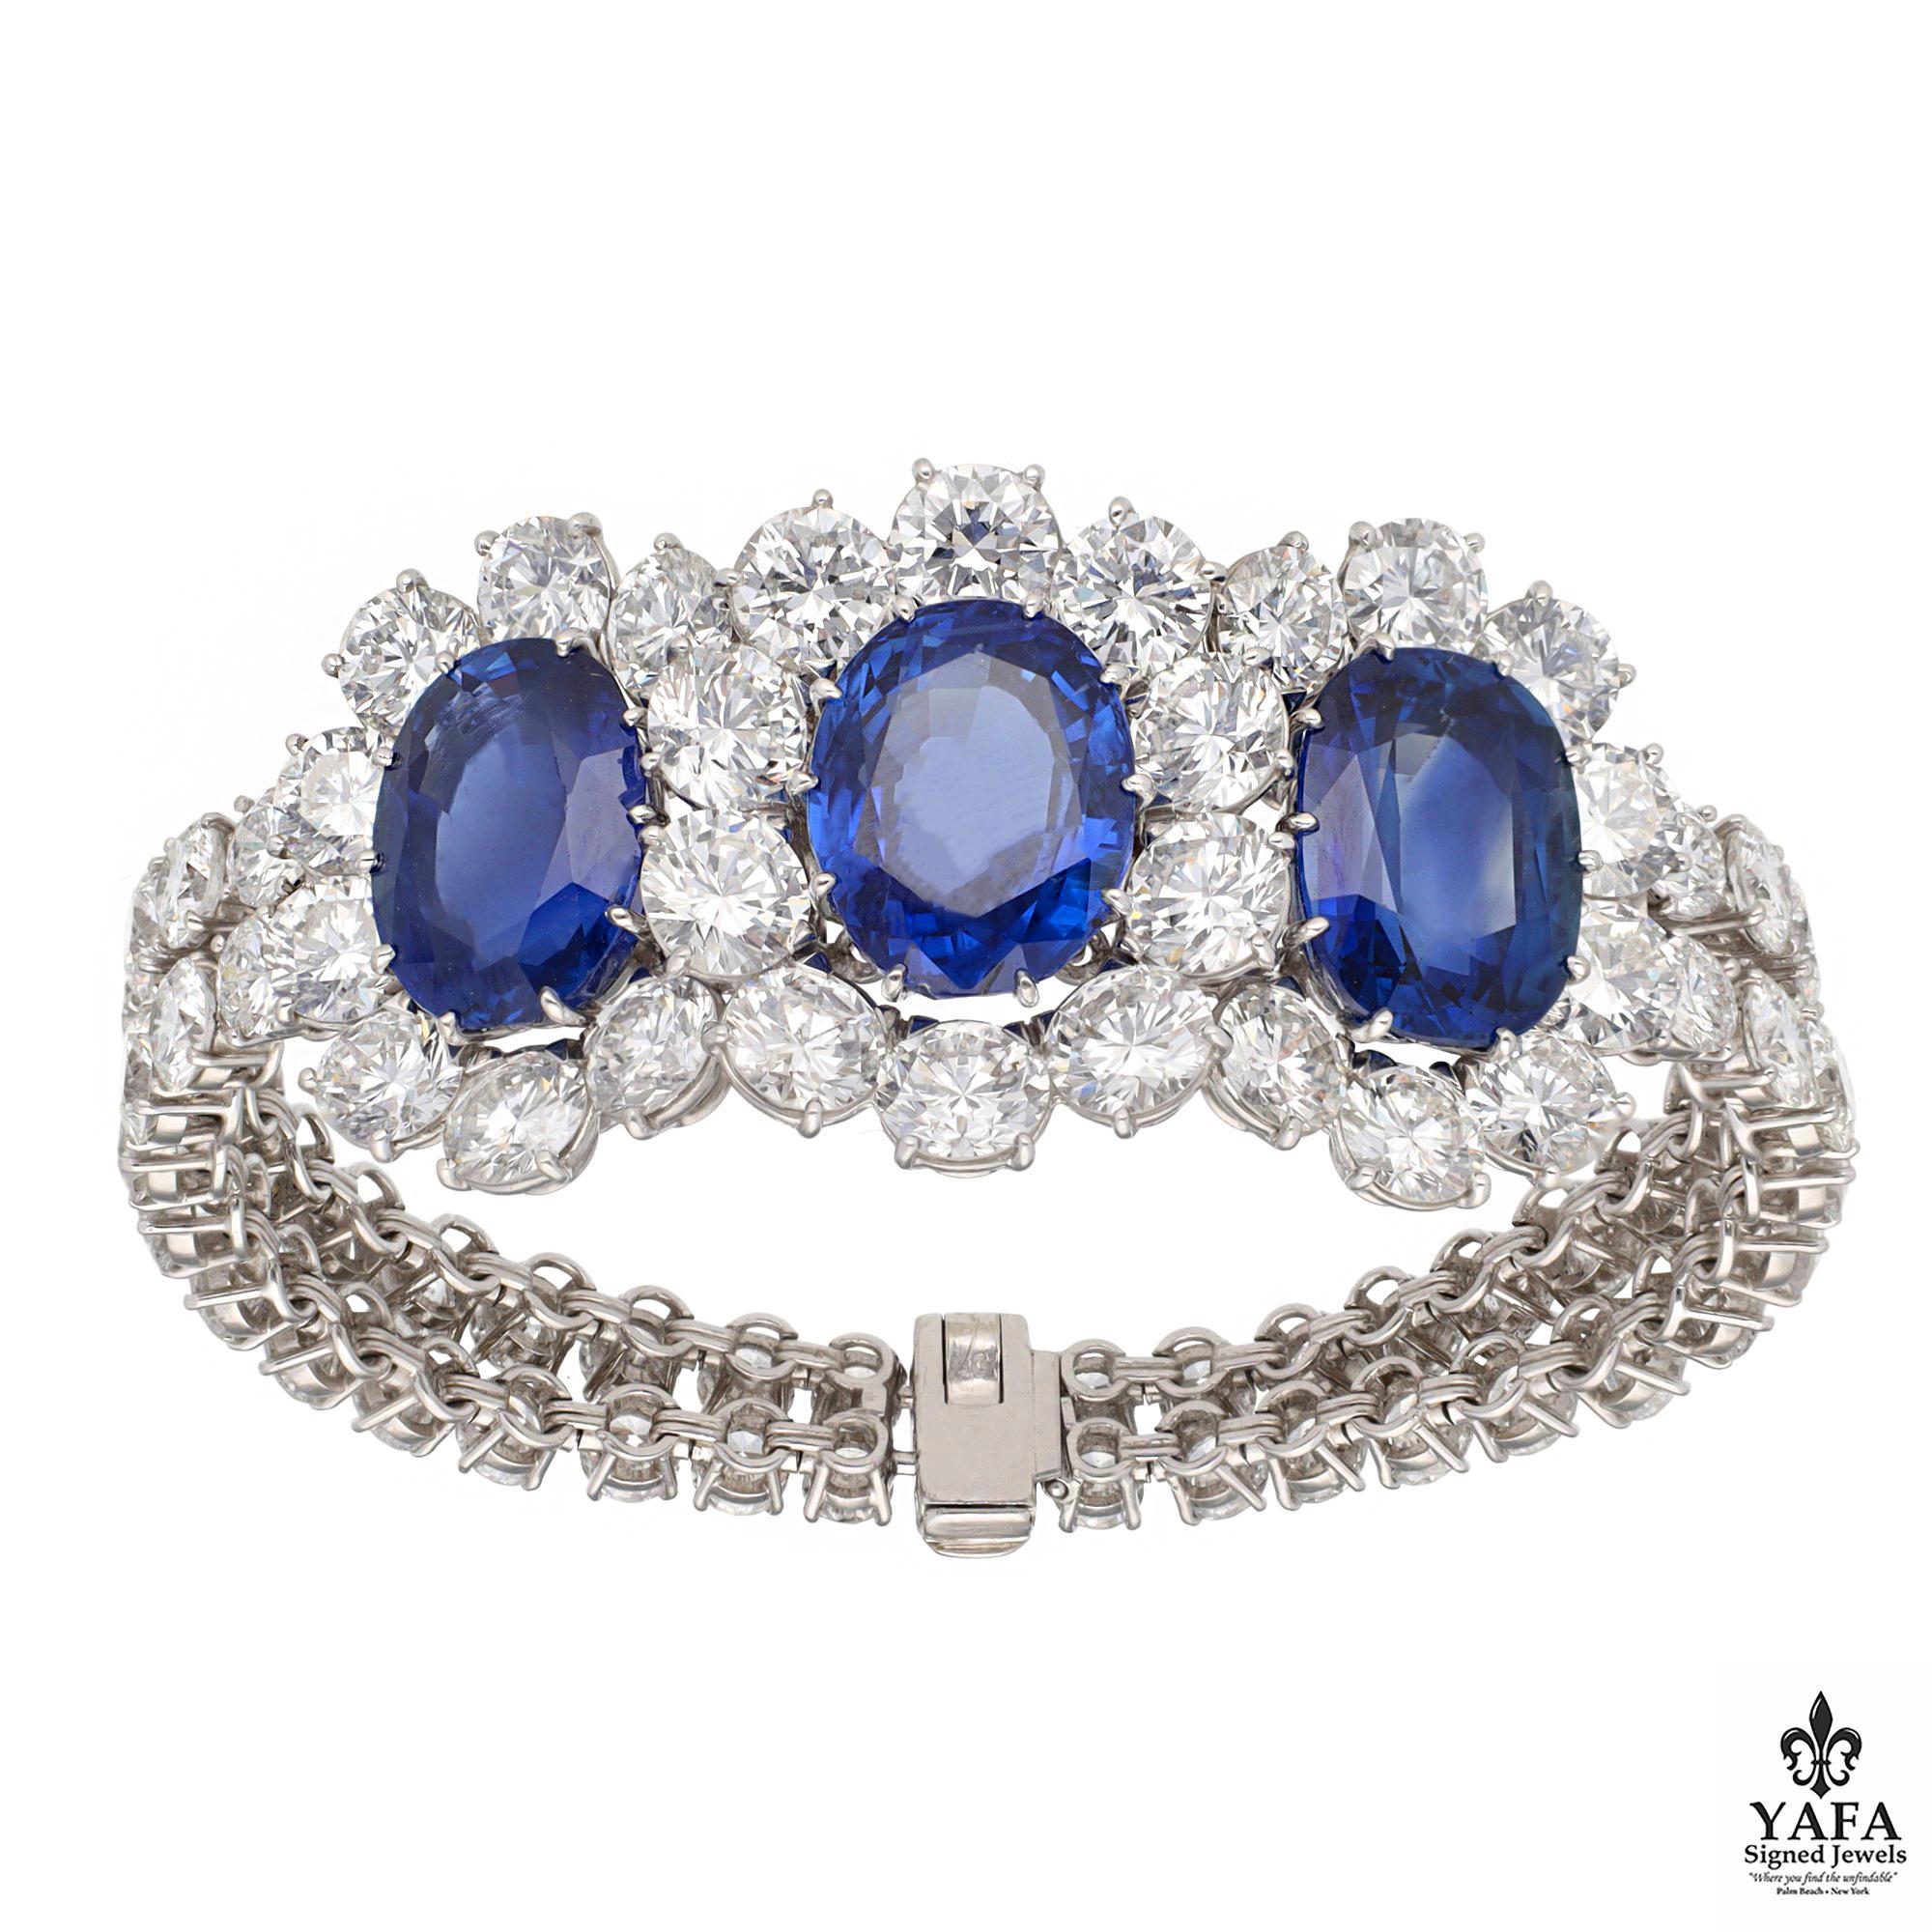 Oval Cut Van Cleef & Arpels 3-Oval Shaped Sapphires and Diamond Bracelet For Sale